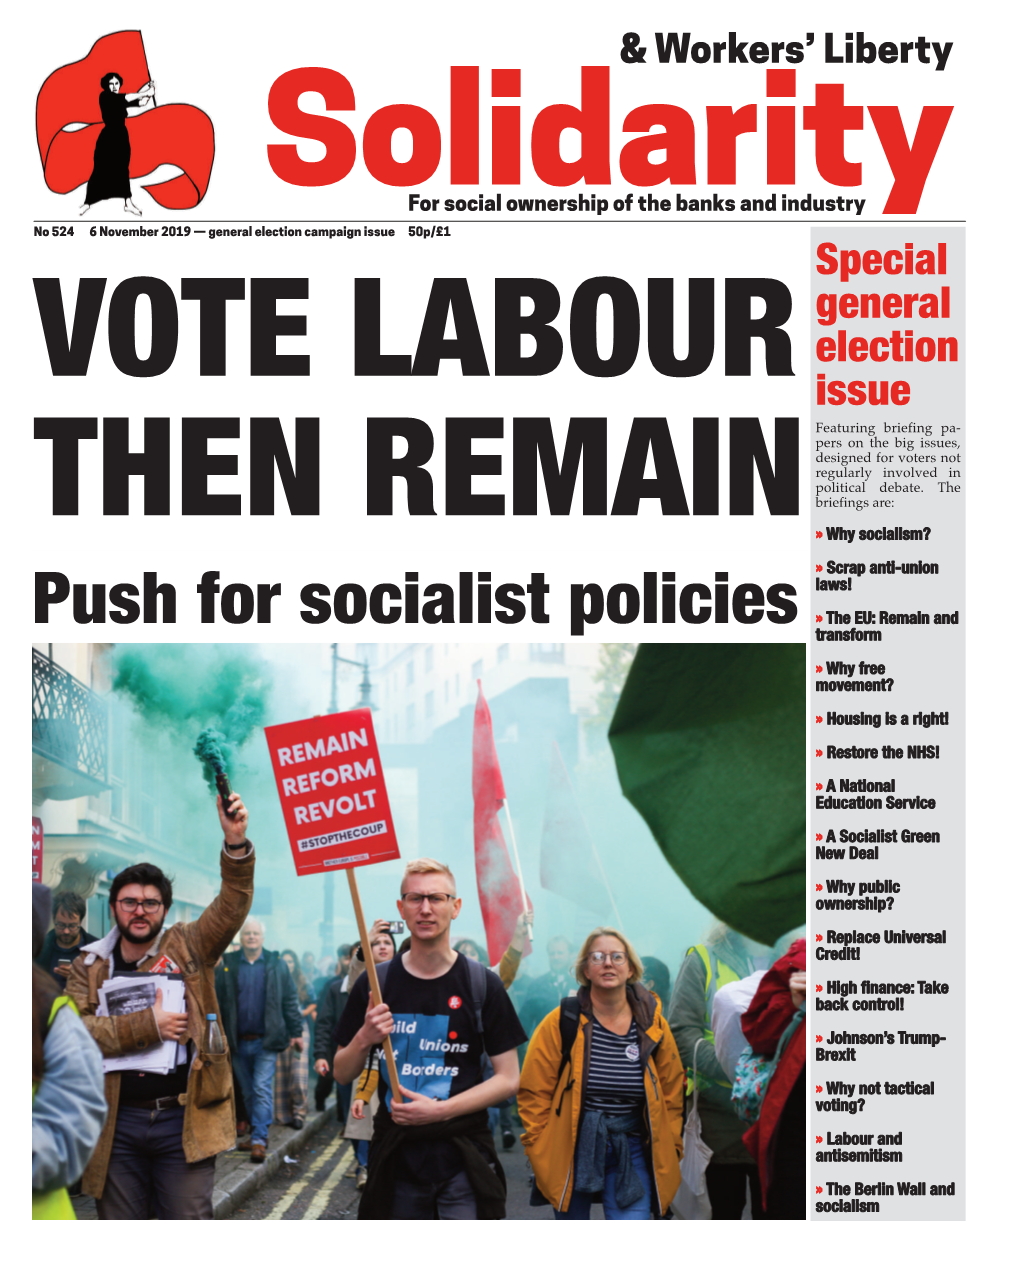 Push for Socialist Policies